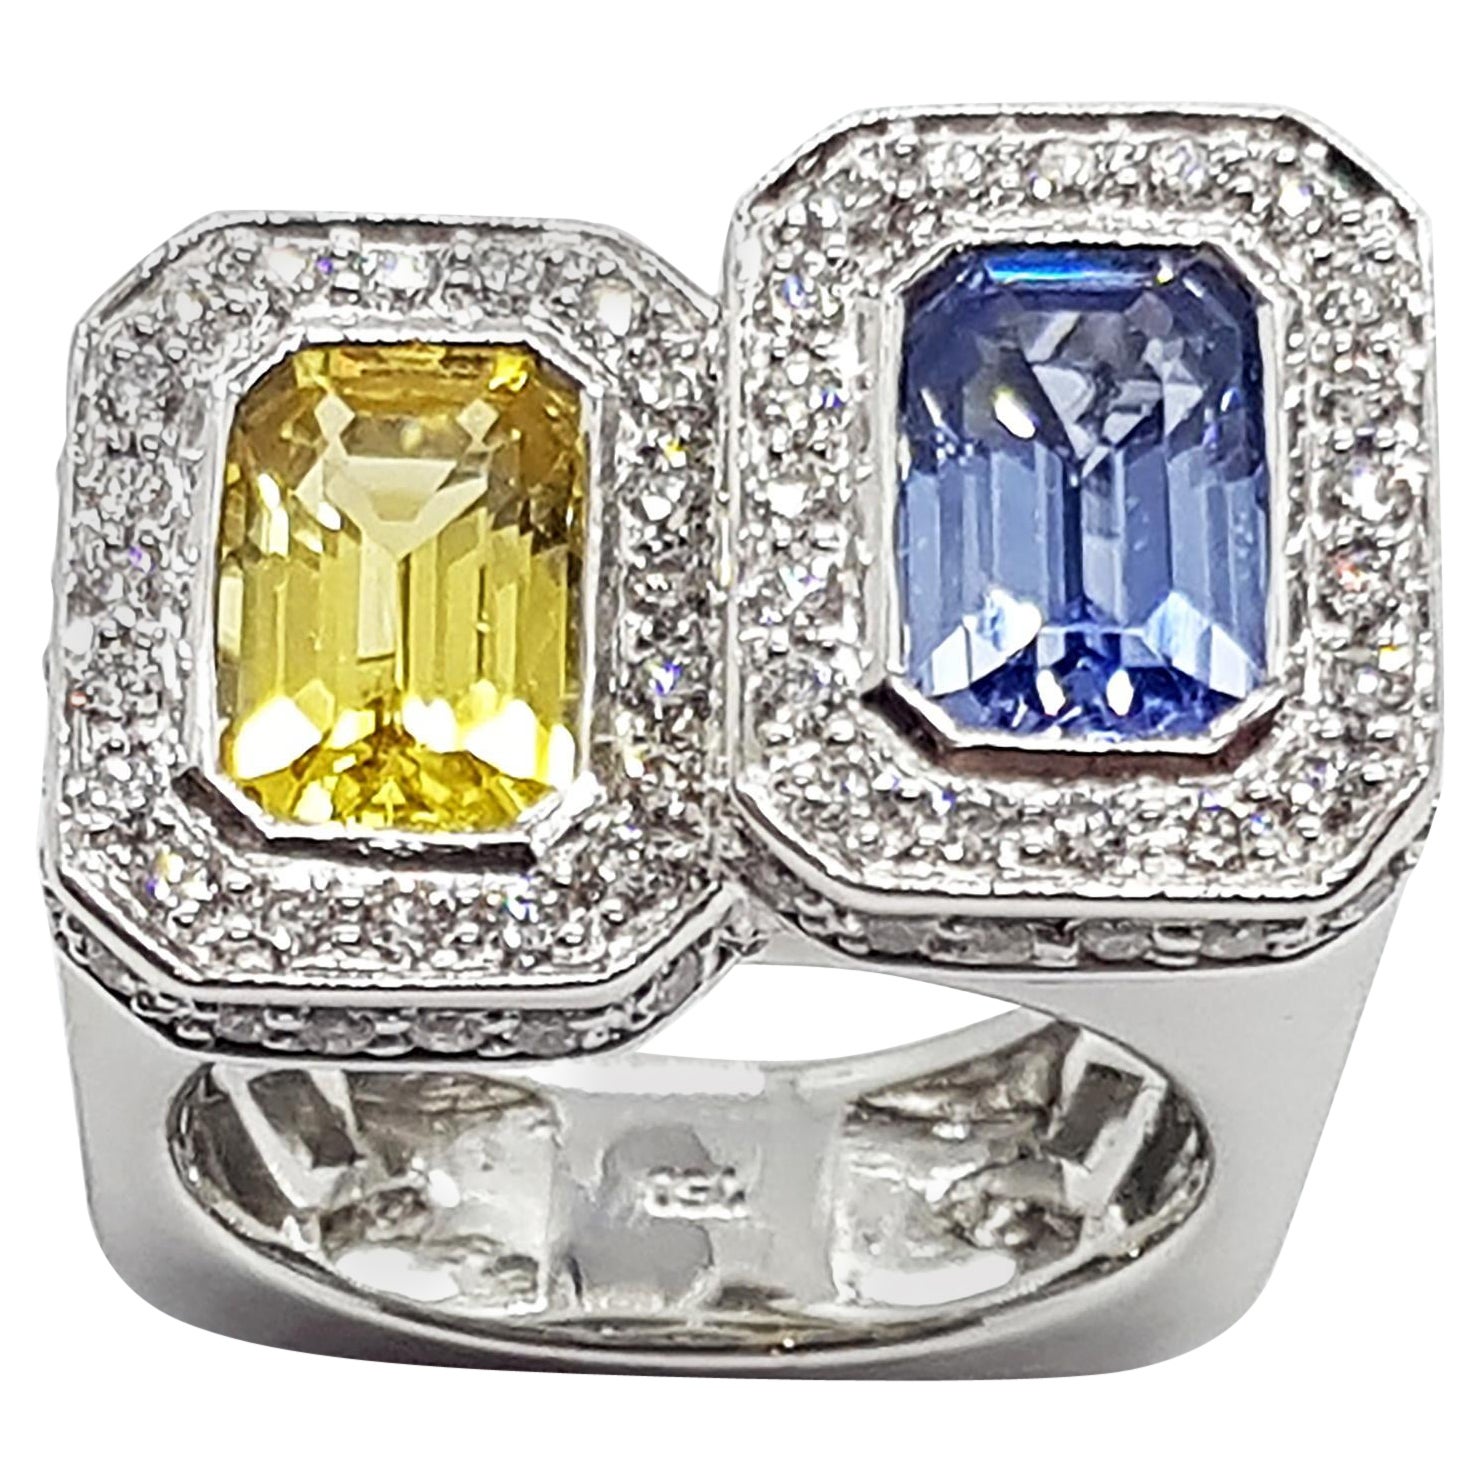 Blue Sapphire and Yellow Sapphire with Diamond Ring Set in 18 Karat White Gold 